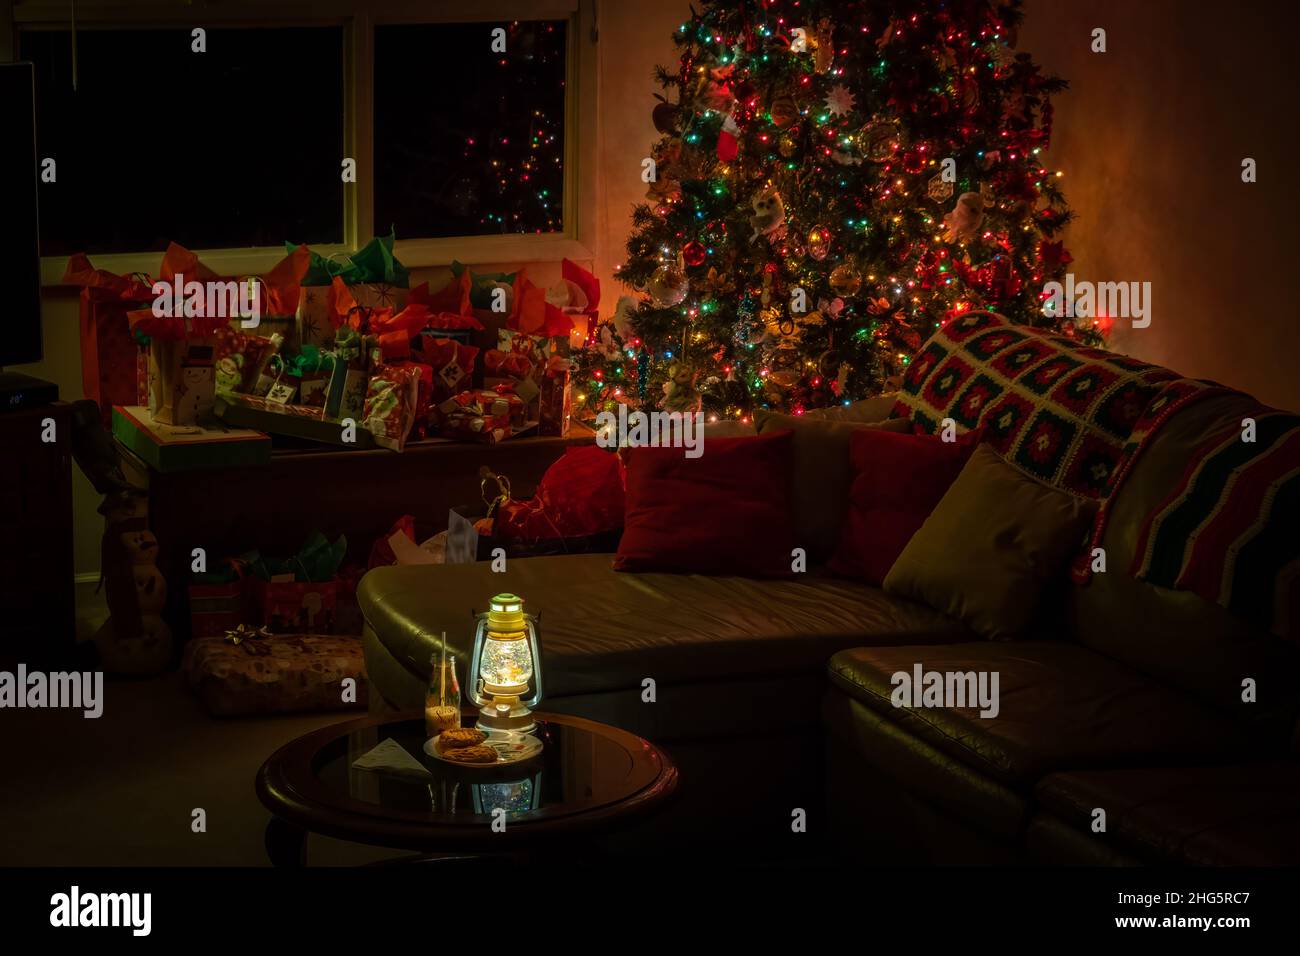 A nighttime living room Christmas scene with a decorated tree, presents, and milk and cookies for Santa. Stock Photo